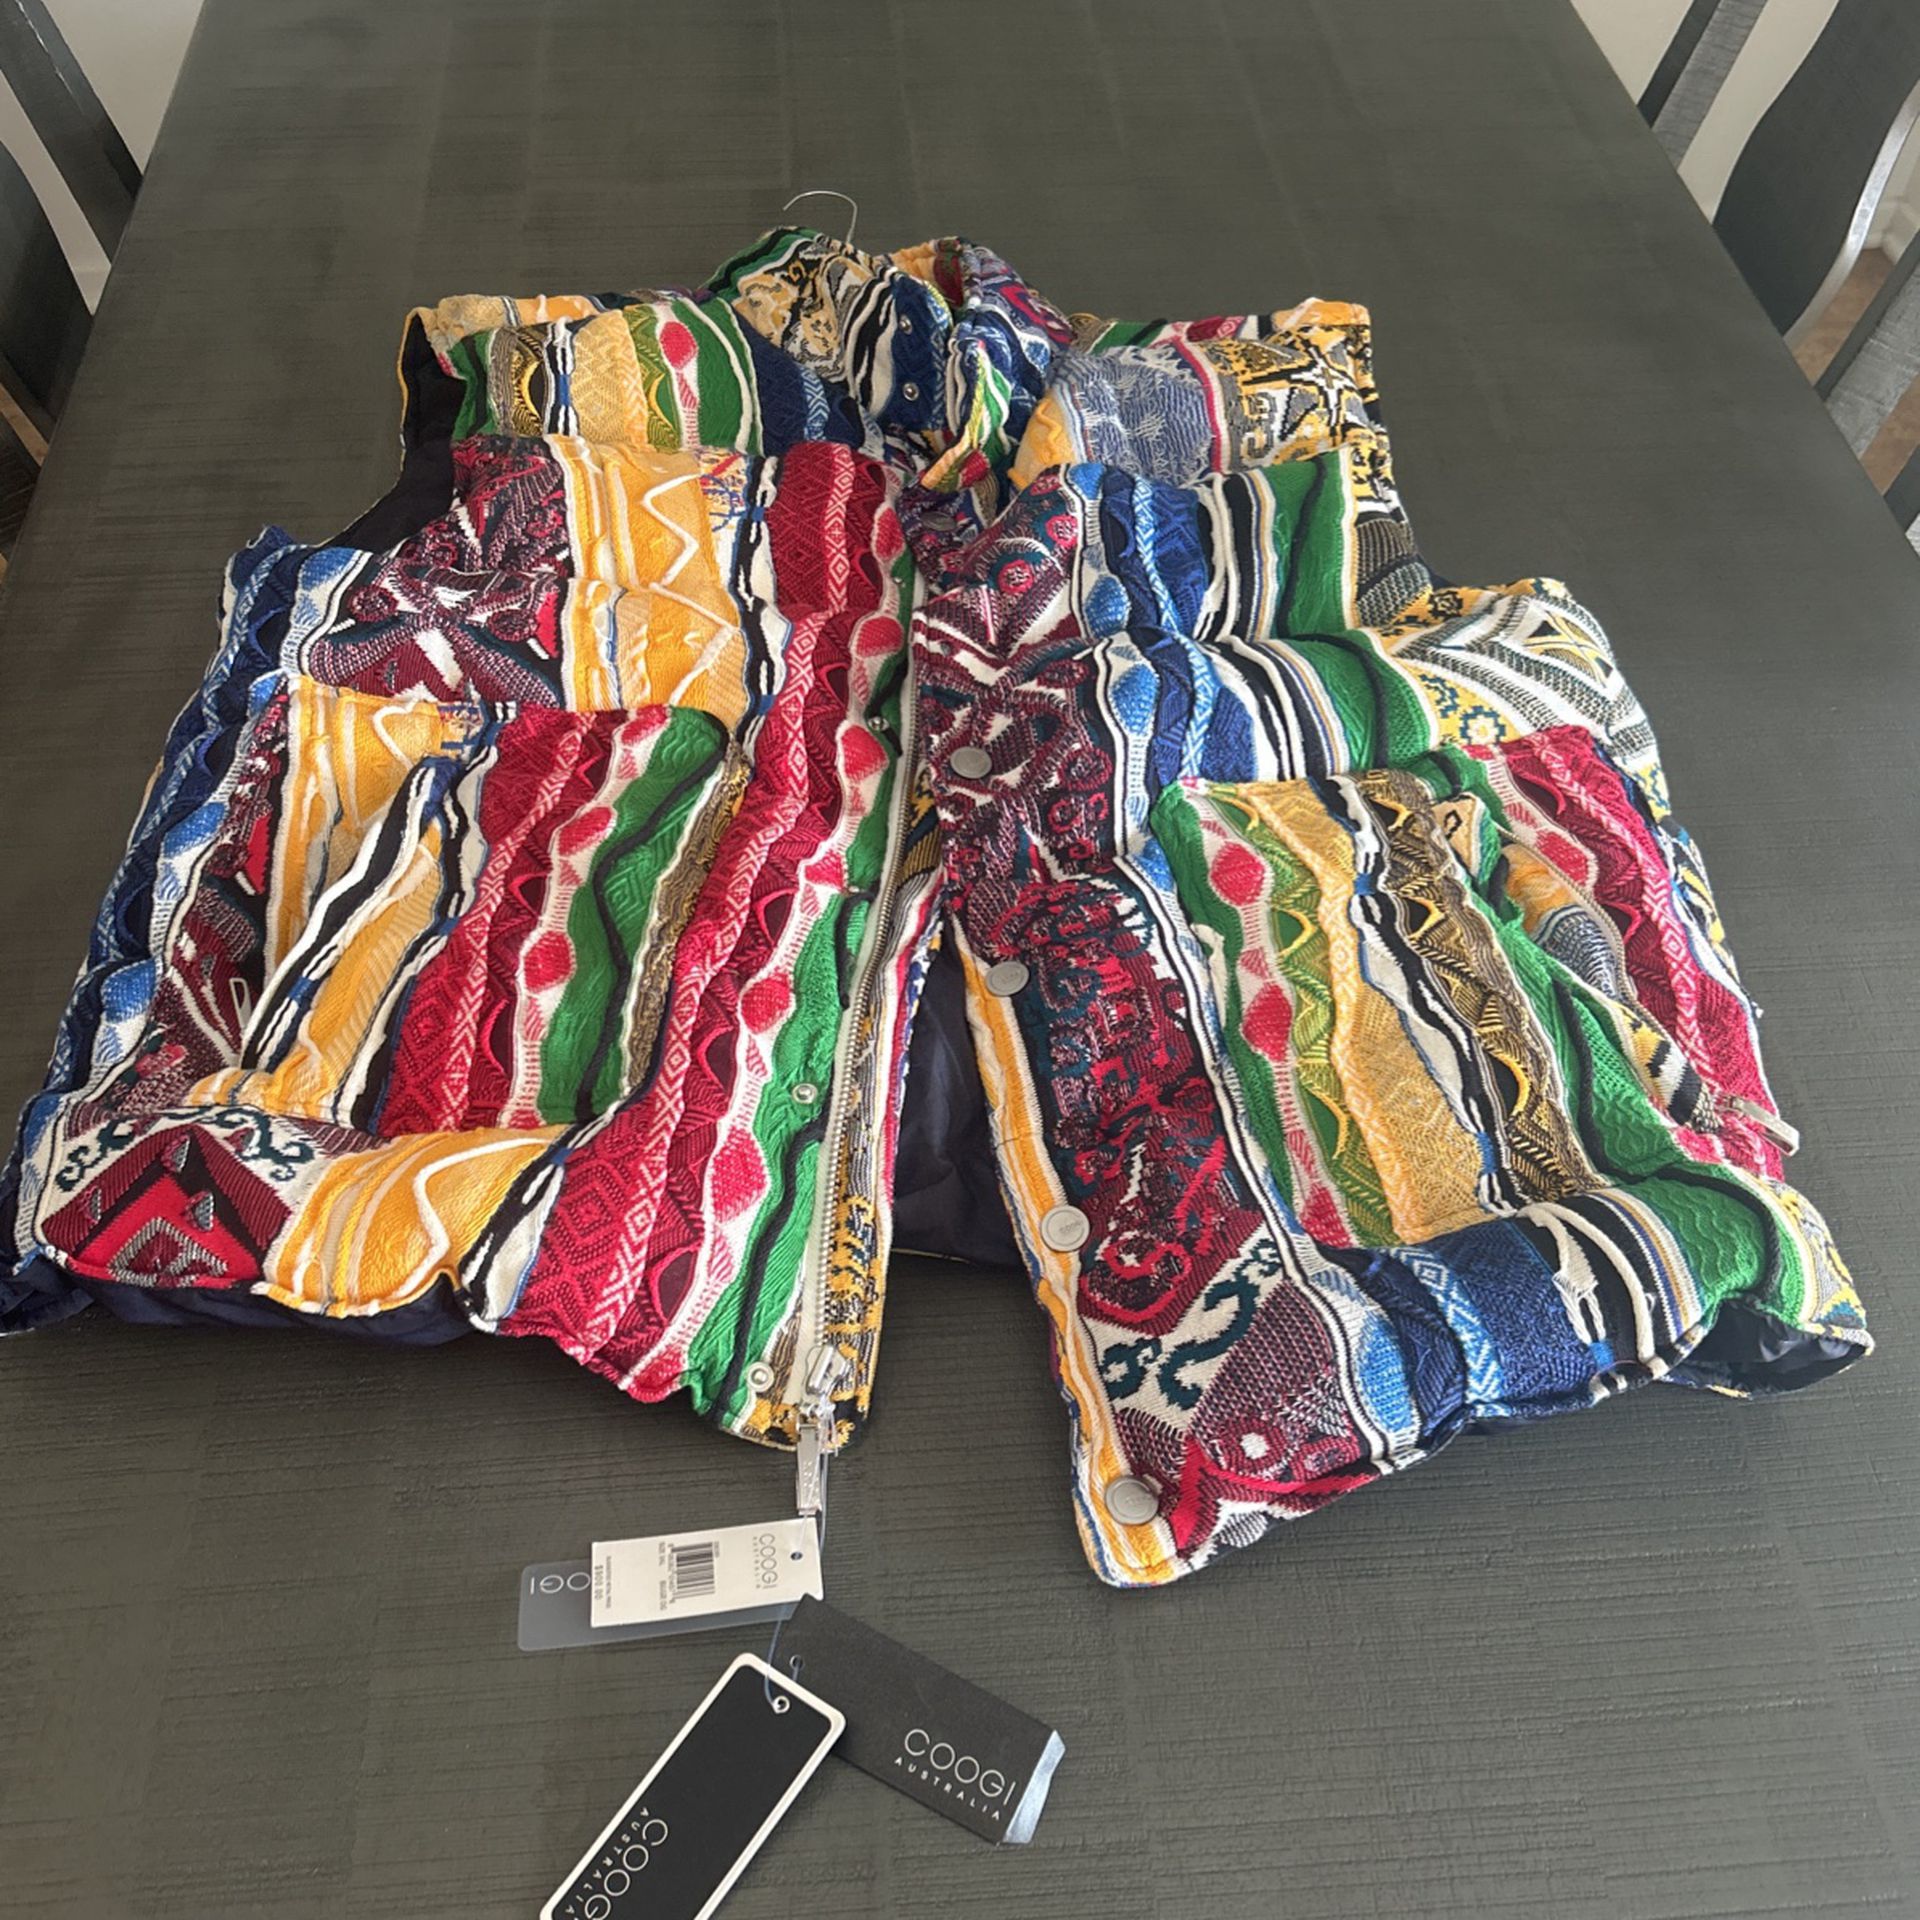 Authentic Brand New Coogi Vest For Sale!!